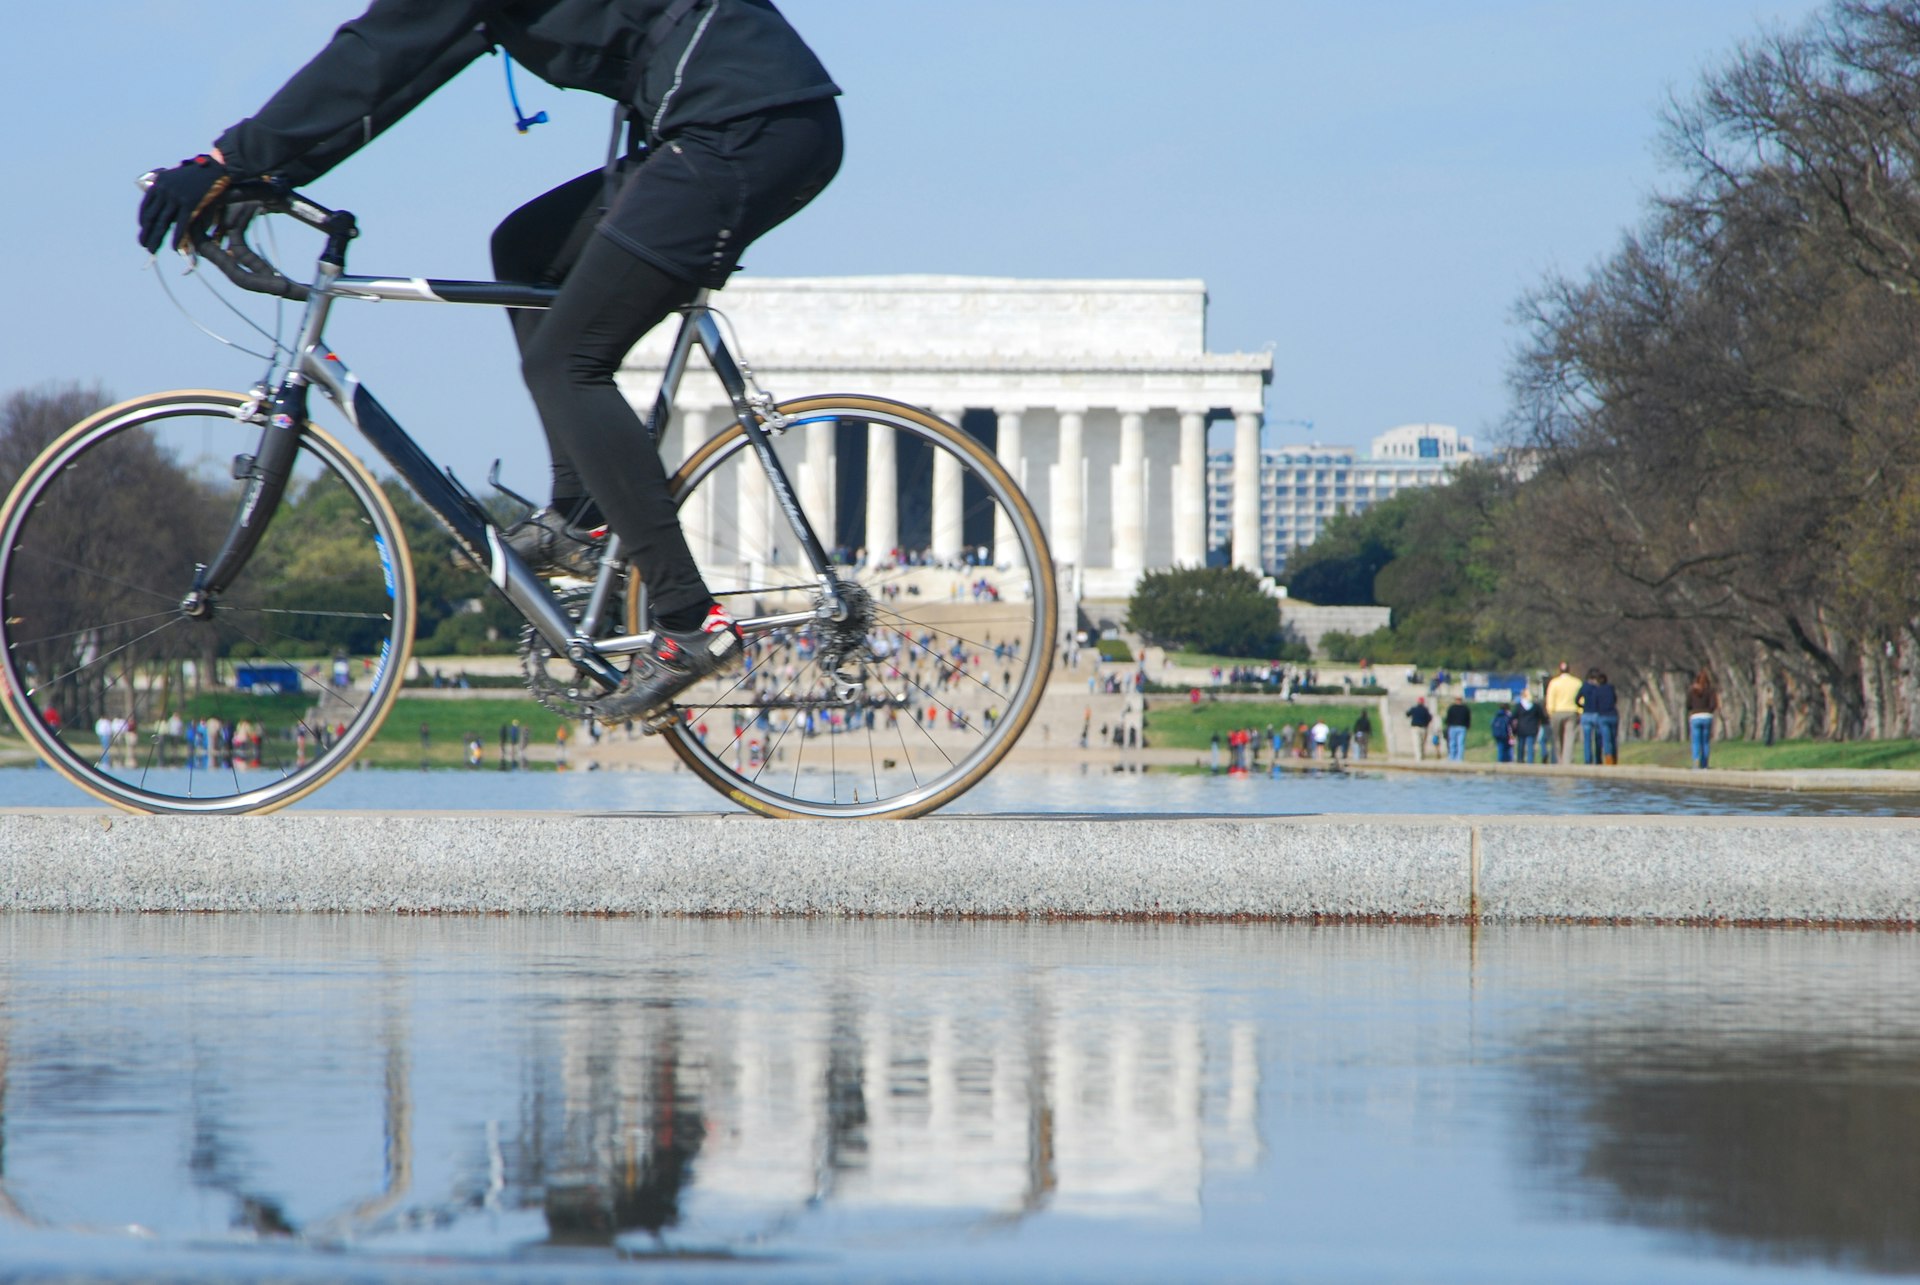 A cyclist pedals along in front of a distinctive white building